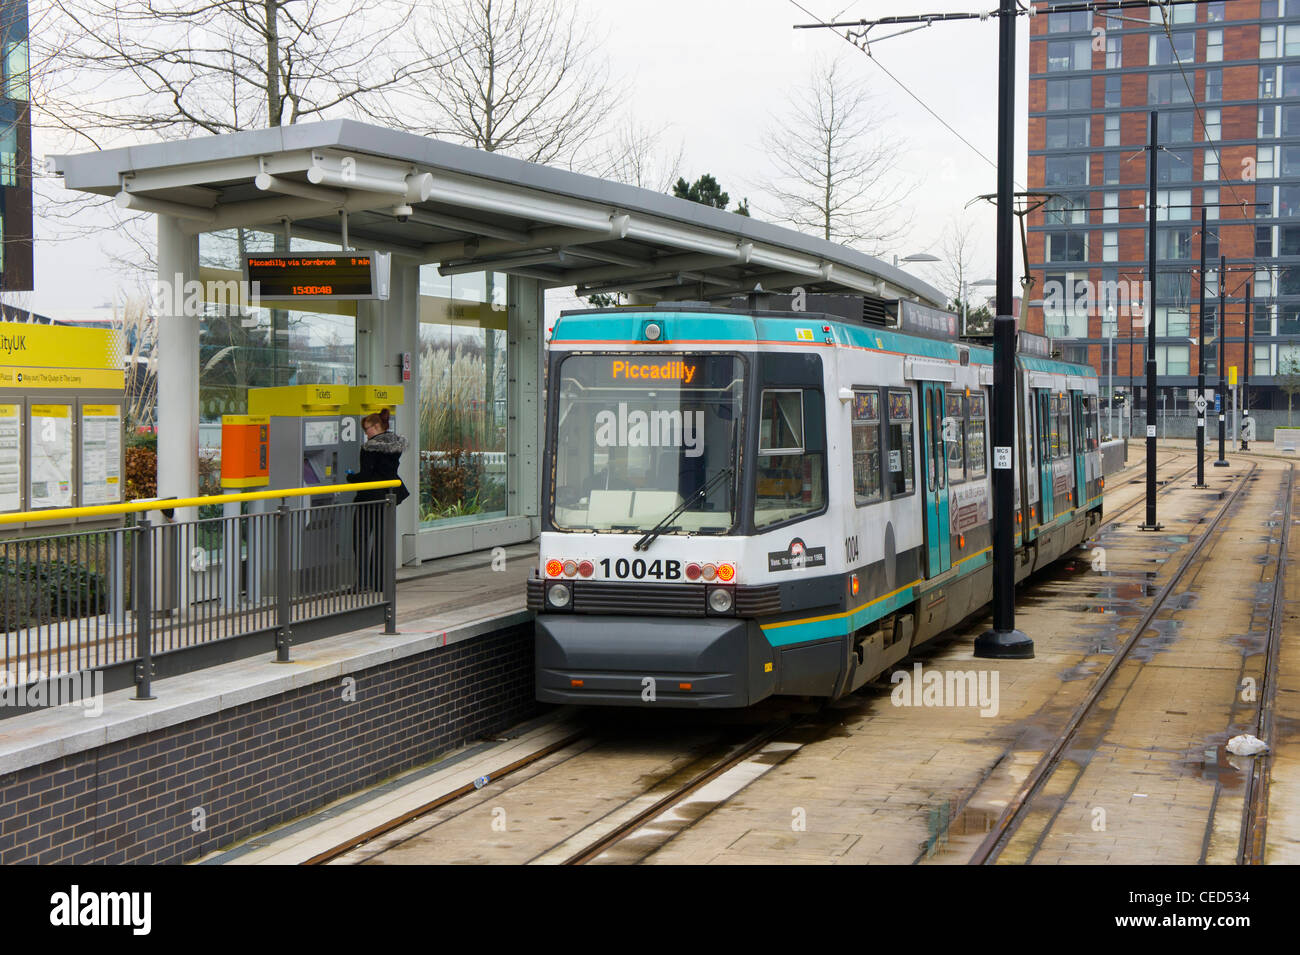 Metrolink tram approaches media city salford with service to Manchester Piccadilly Stock Photo